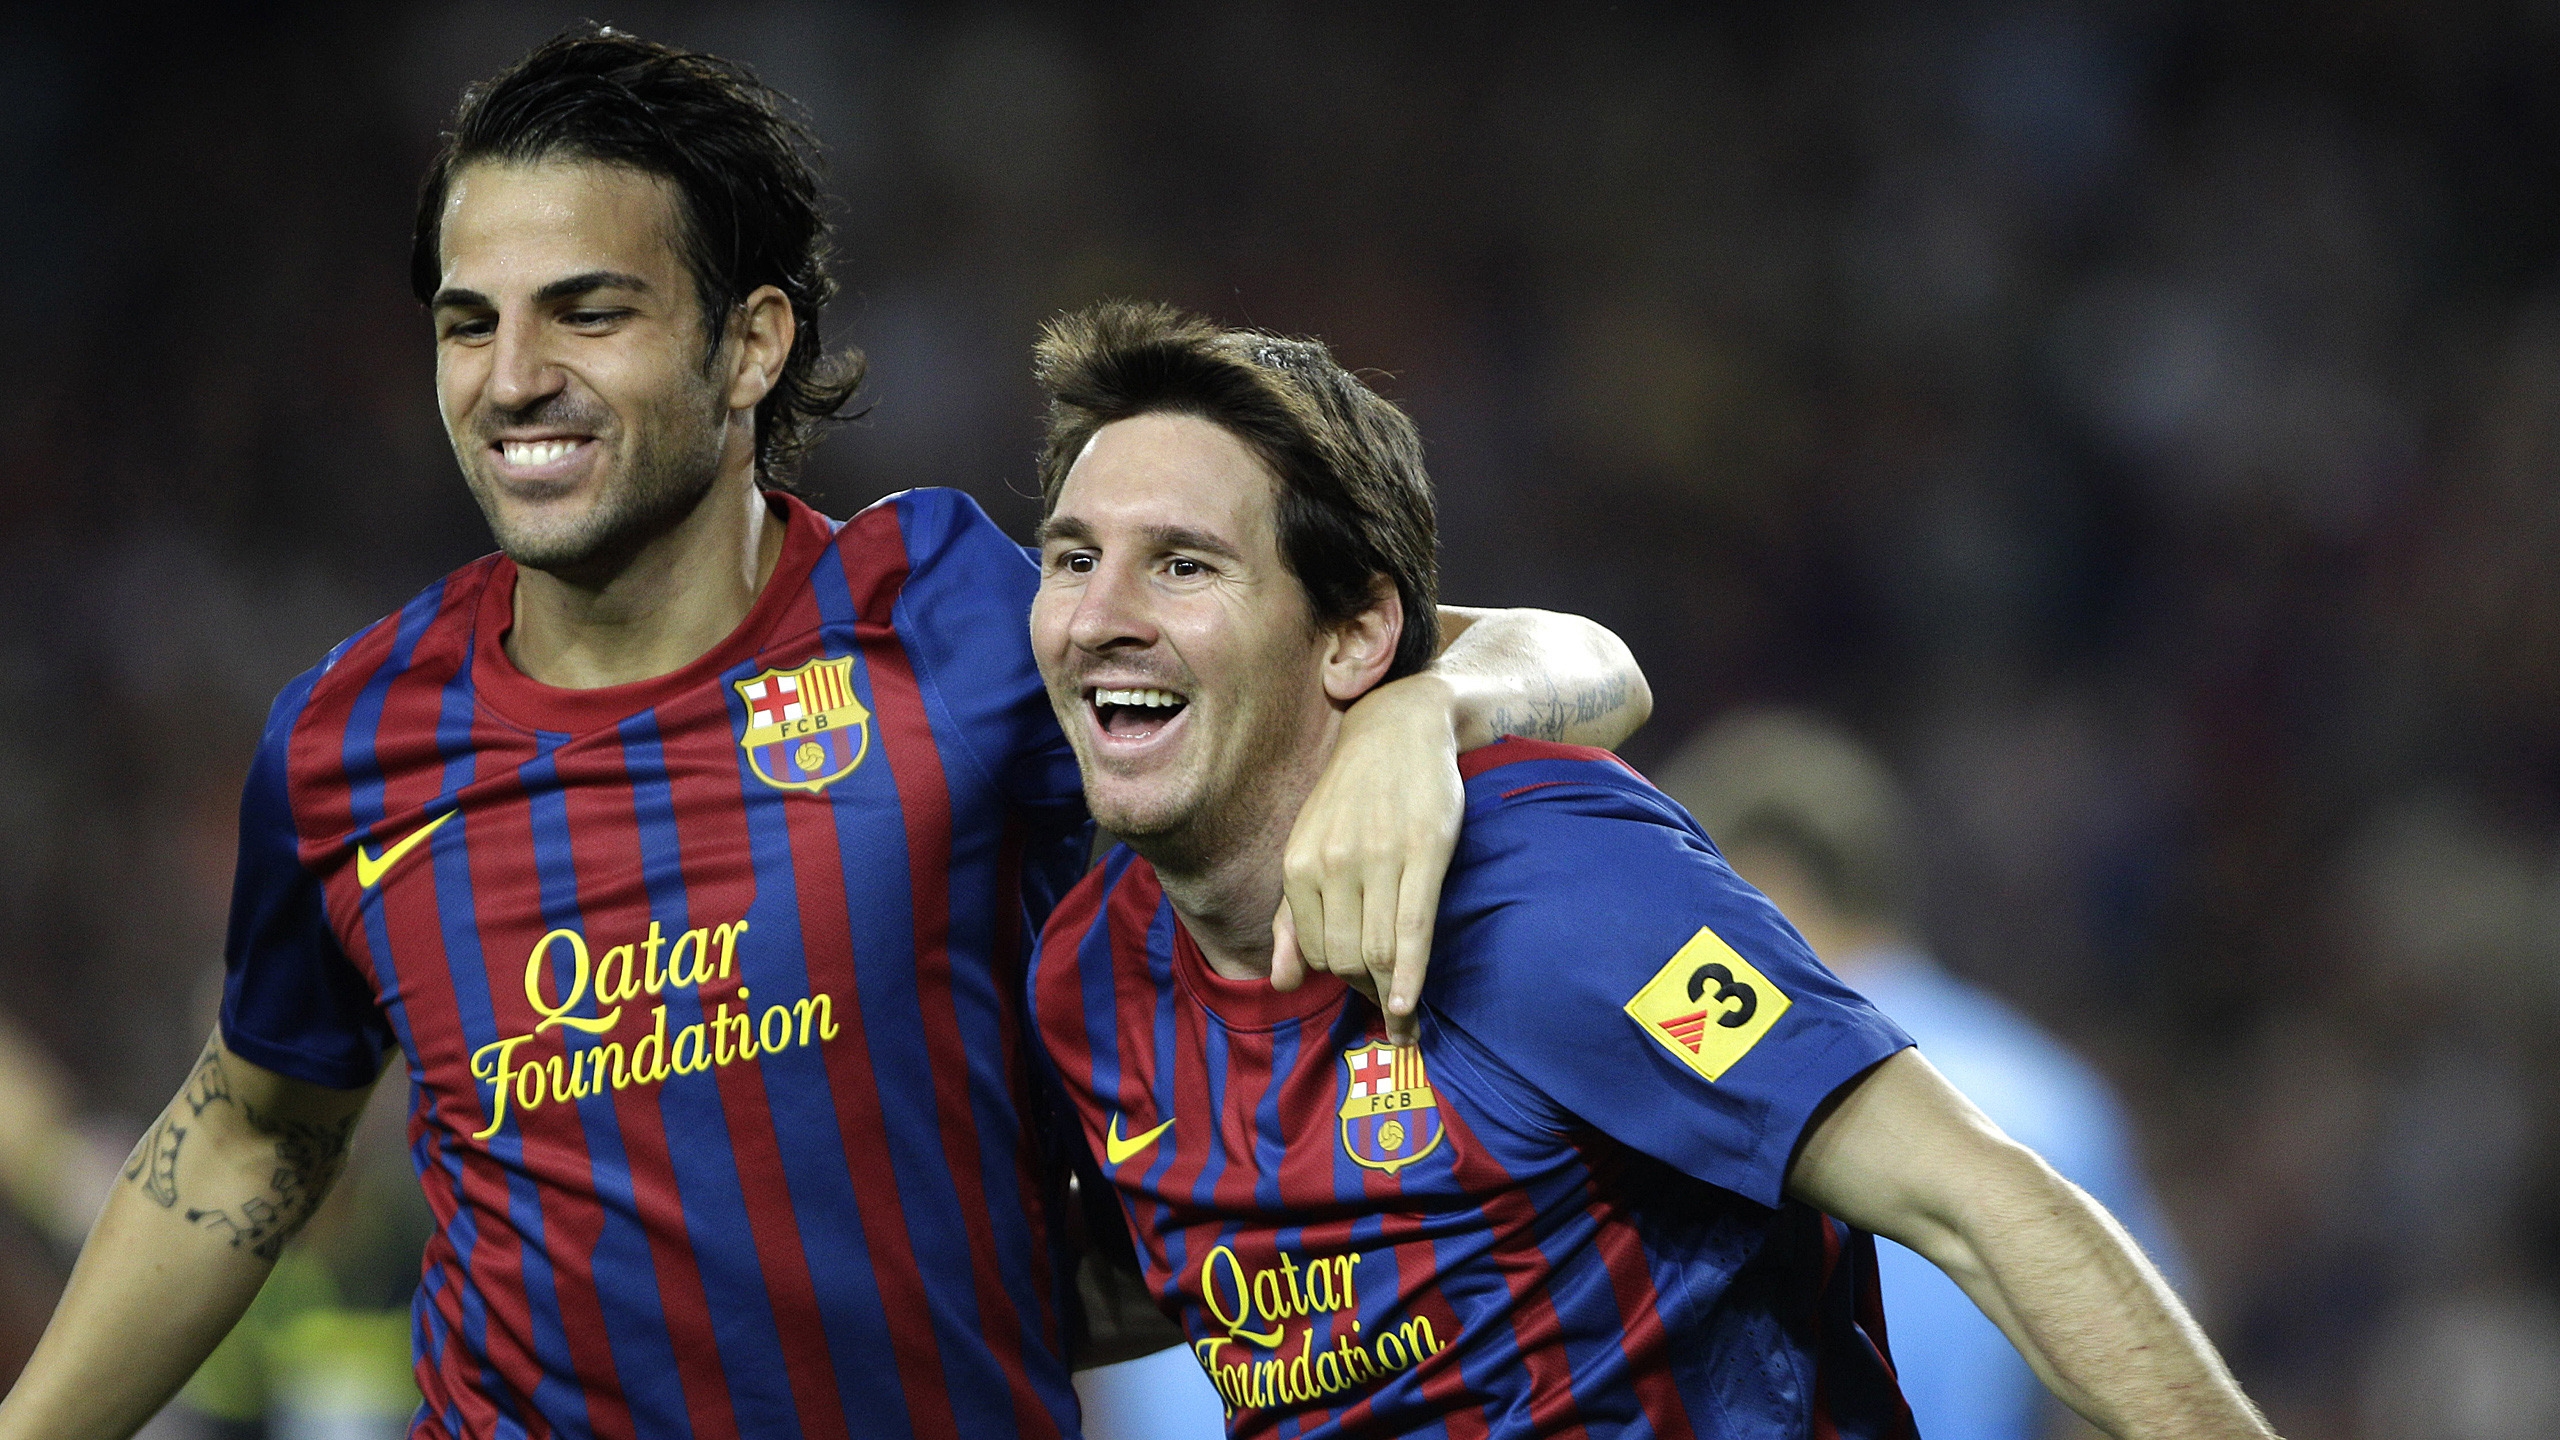 Cesc Fabregas and Lionel Messi for 2560x1440 HDTV resolution